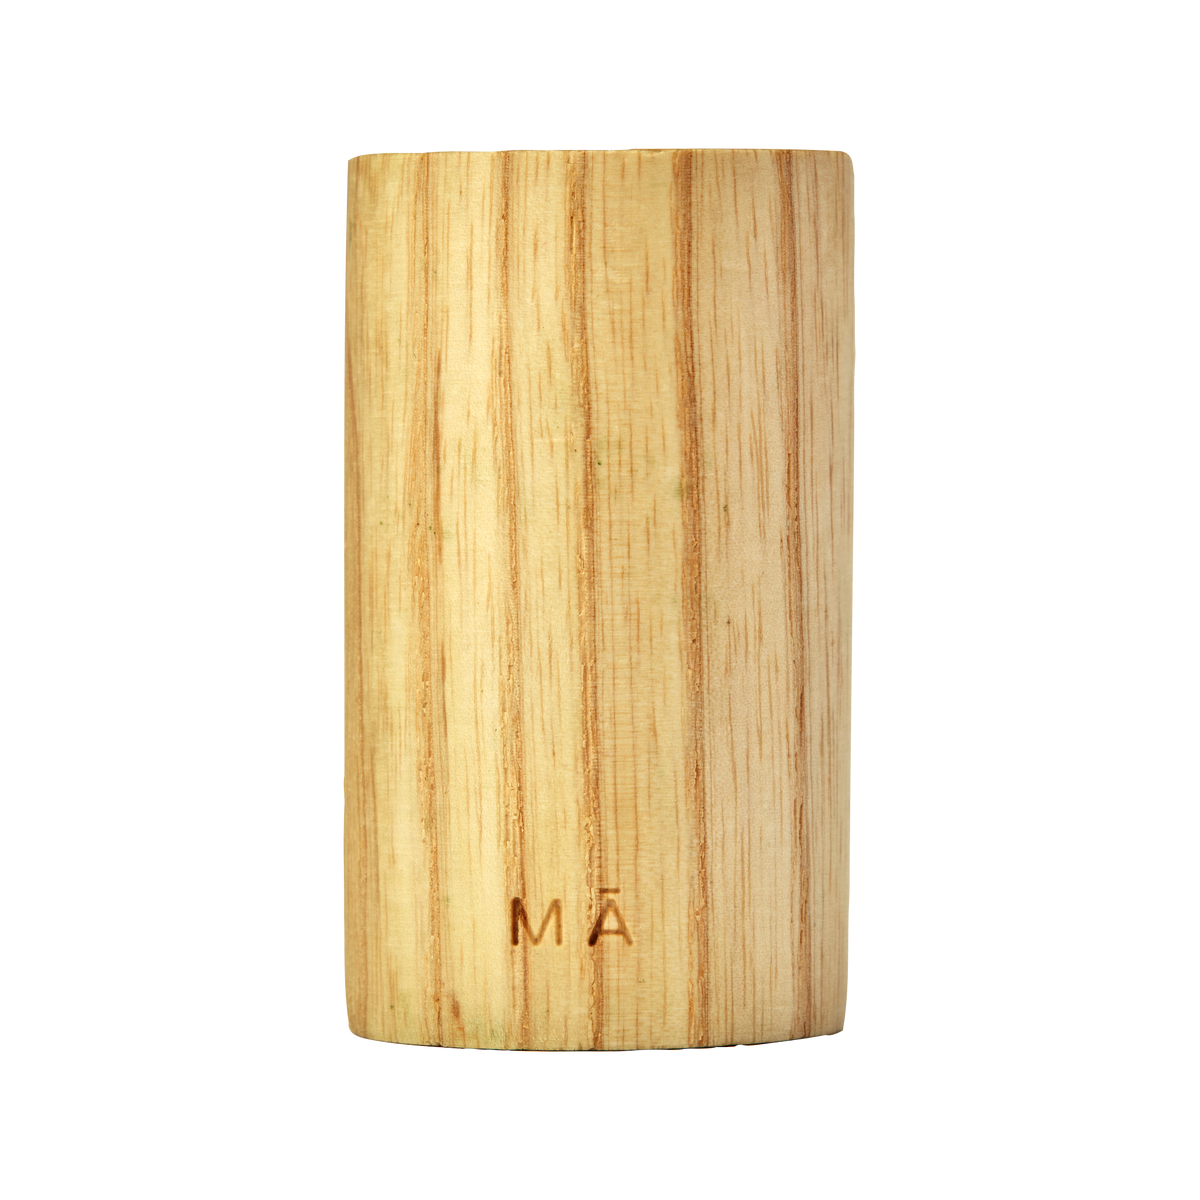 Daroma™ Wooden Diffuser – Daroma™ Natural Wellness